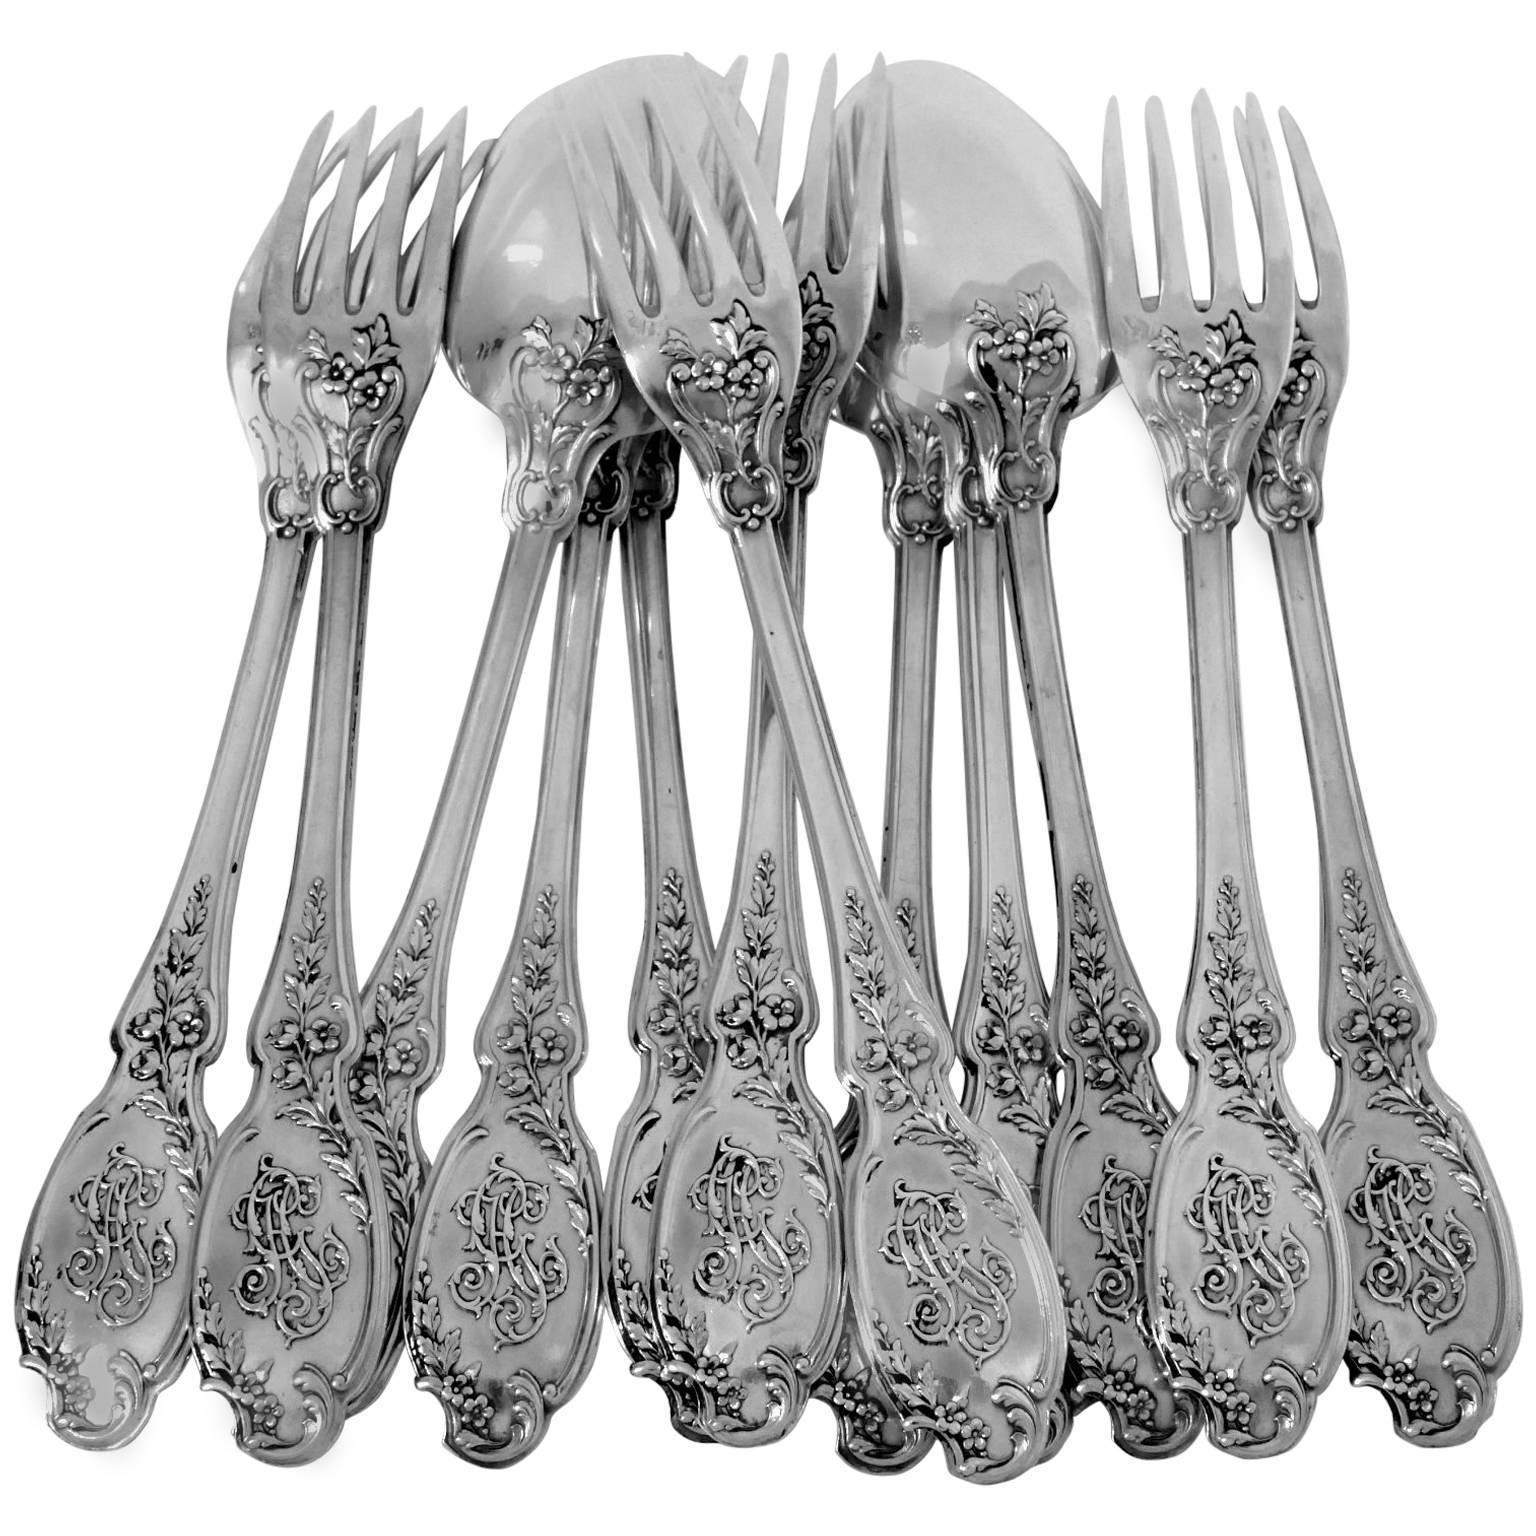 Linzeler French Sterling Silver Dinner Flatware Set 12 pieces, Rococo For Sale